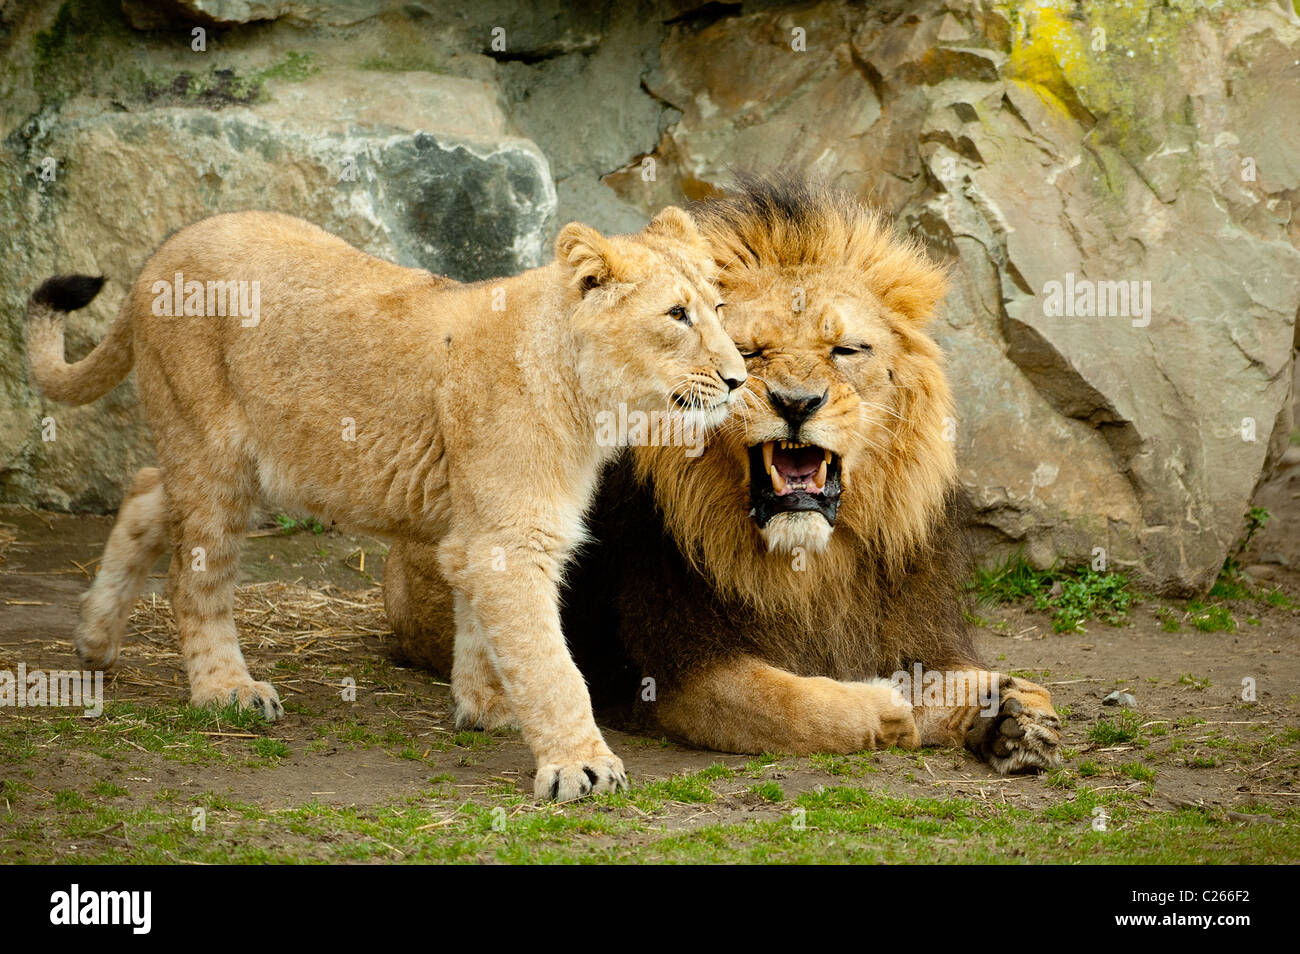 Lions playing in the zoo Stock Photo